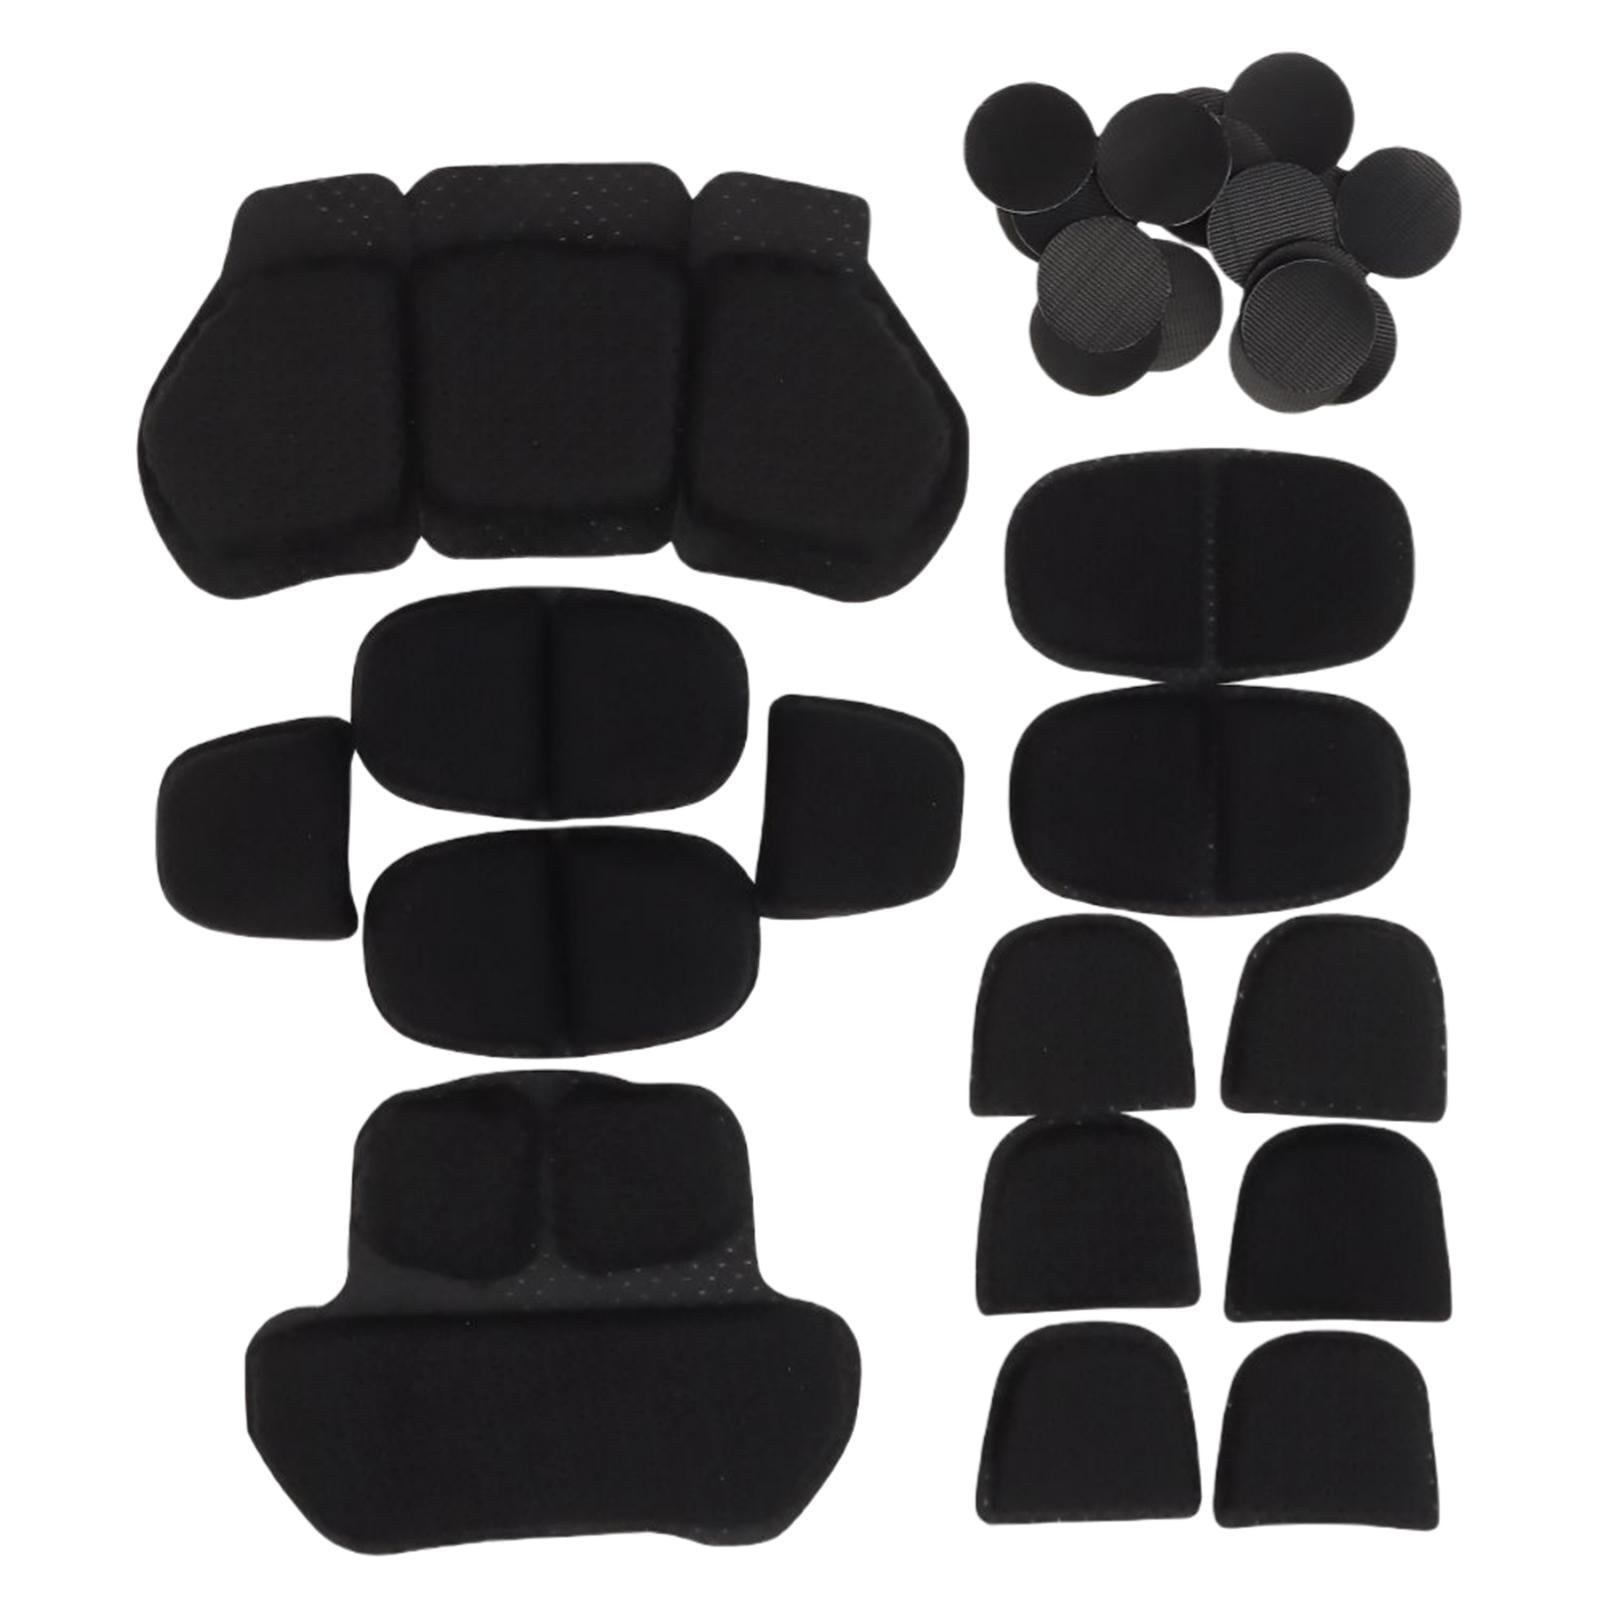 Universal Soft Pad Kits Protective Accessories Outdoor Gded - Walmart.com